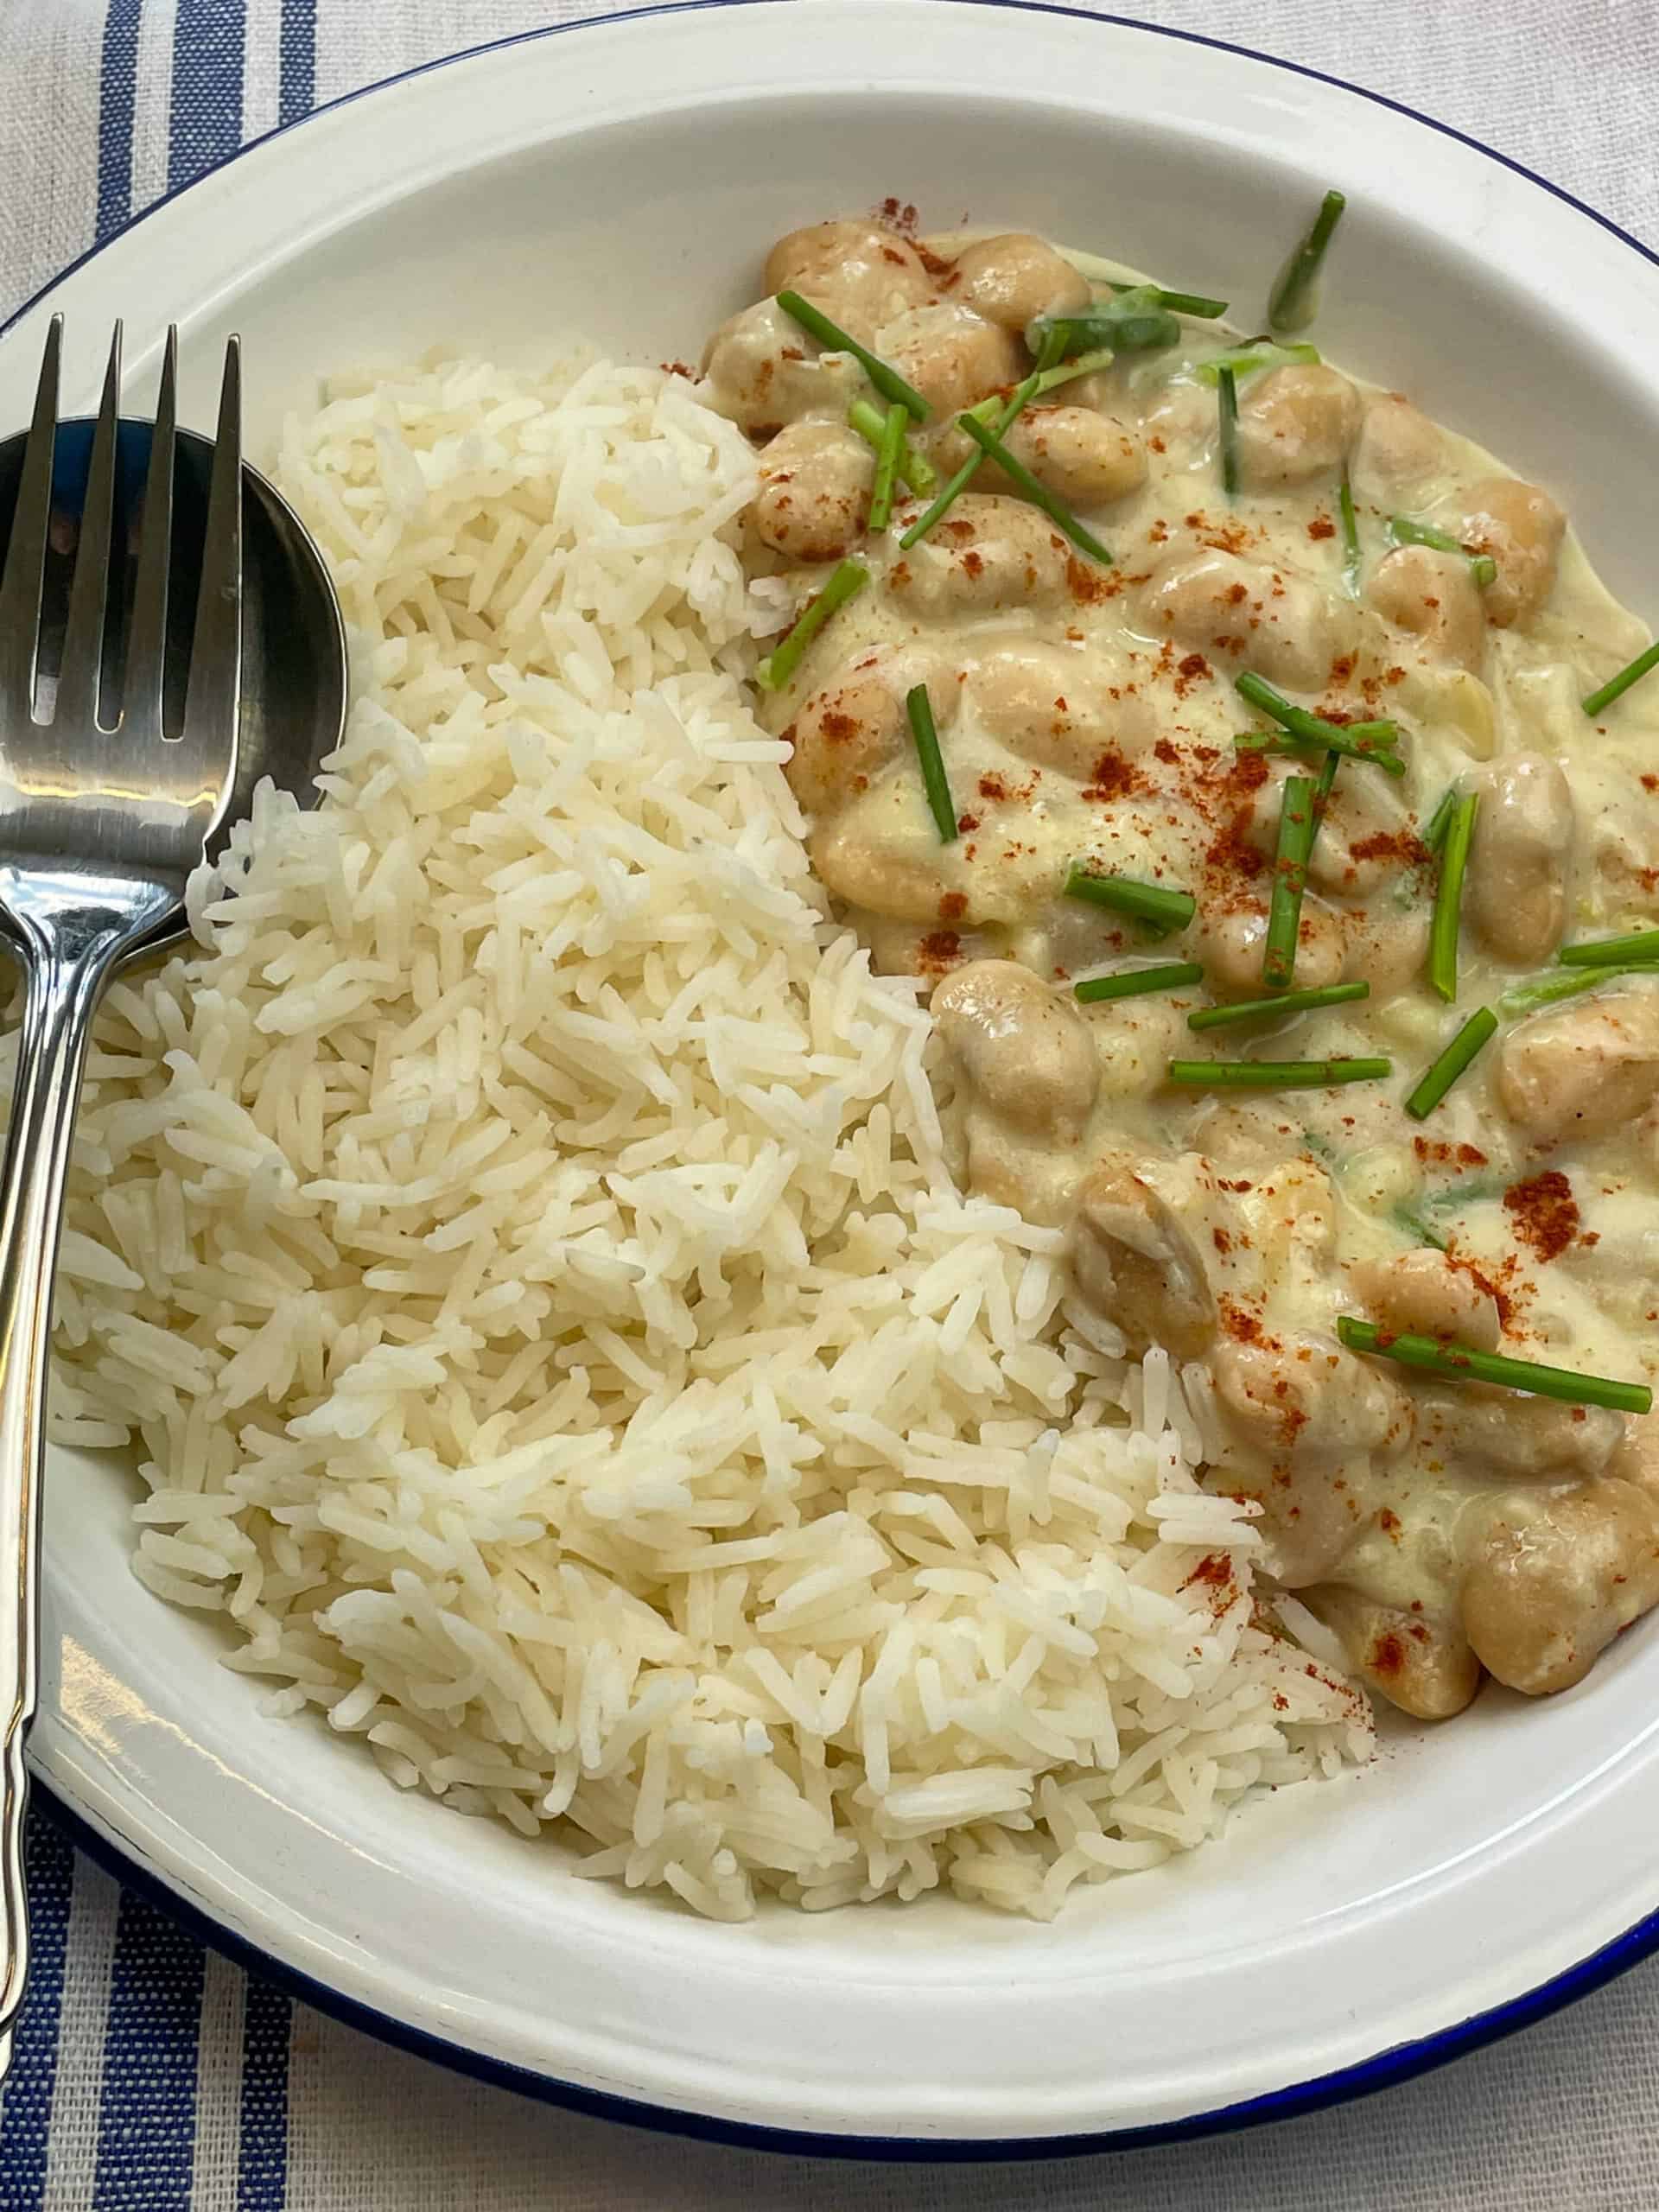 vegan butter bean 'chicken' supreme served with rice, spoon and fork at the side and blue striped tea towel, featured image.